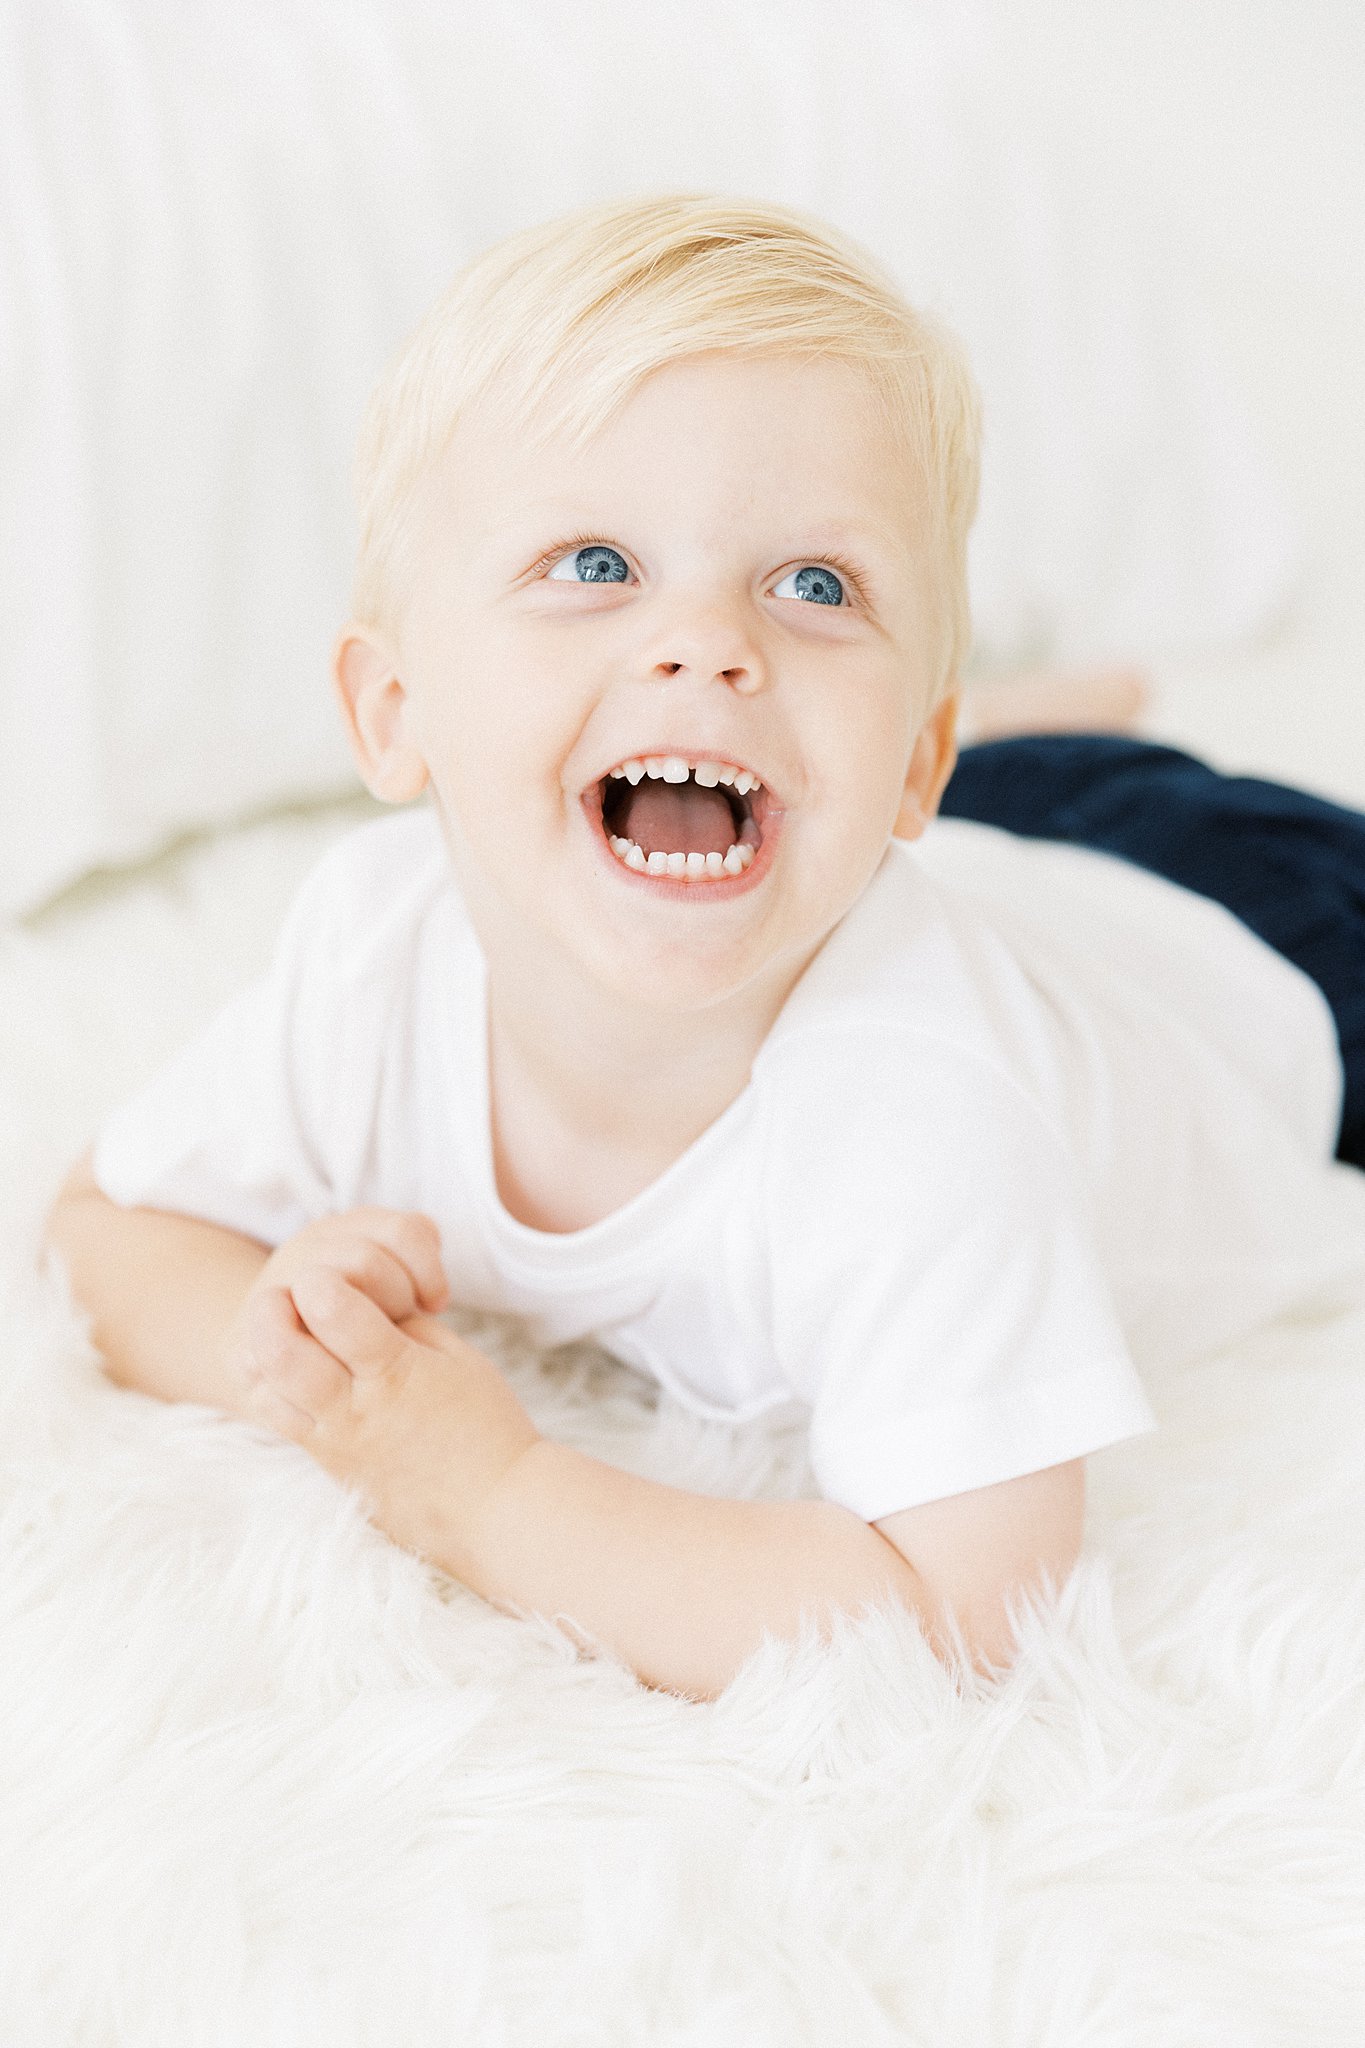 A toddler boy lays on a white rug smiling wide and wearing a white shirt